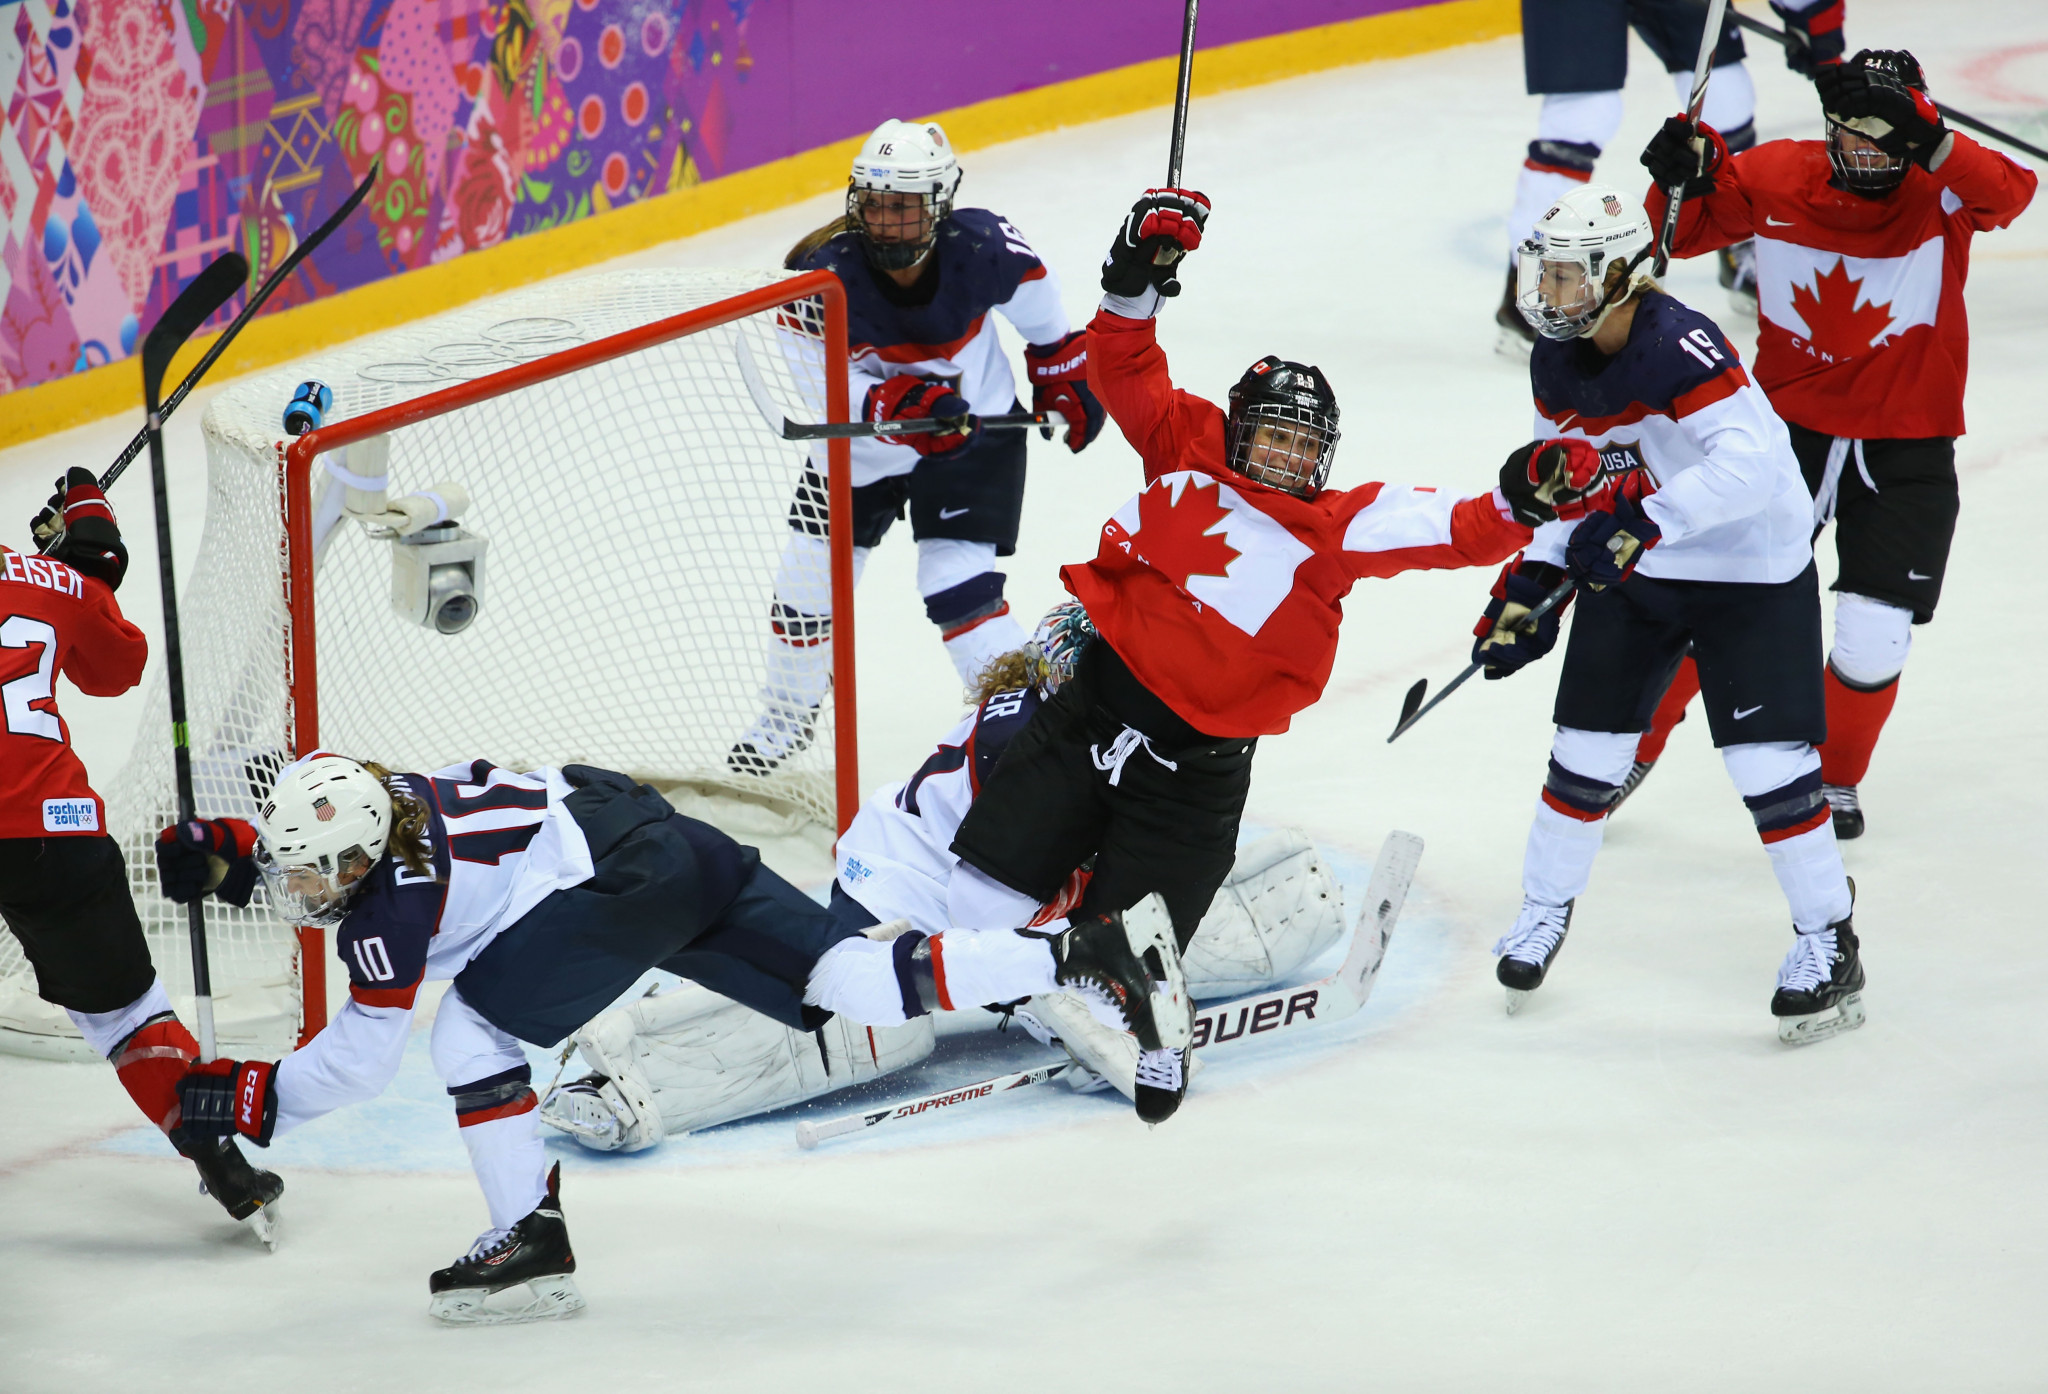 Canada are aiming for a fifth straight women's ice hockey gold medal at Pyeongchang 2018 ©Getty Images